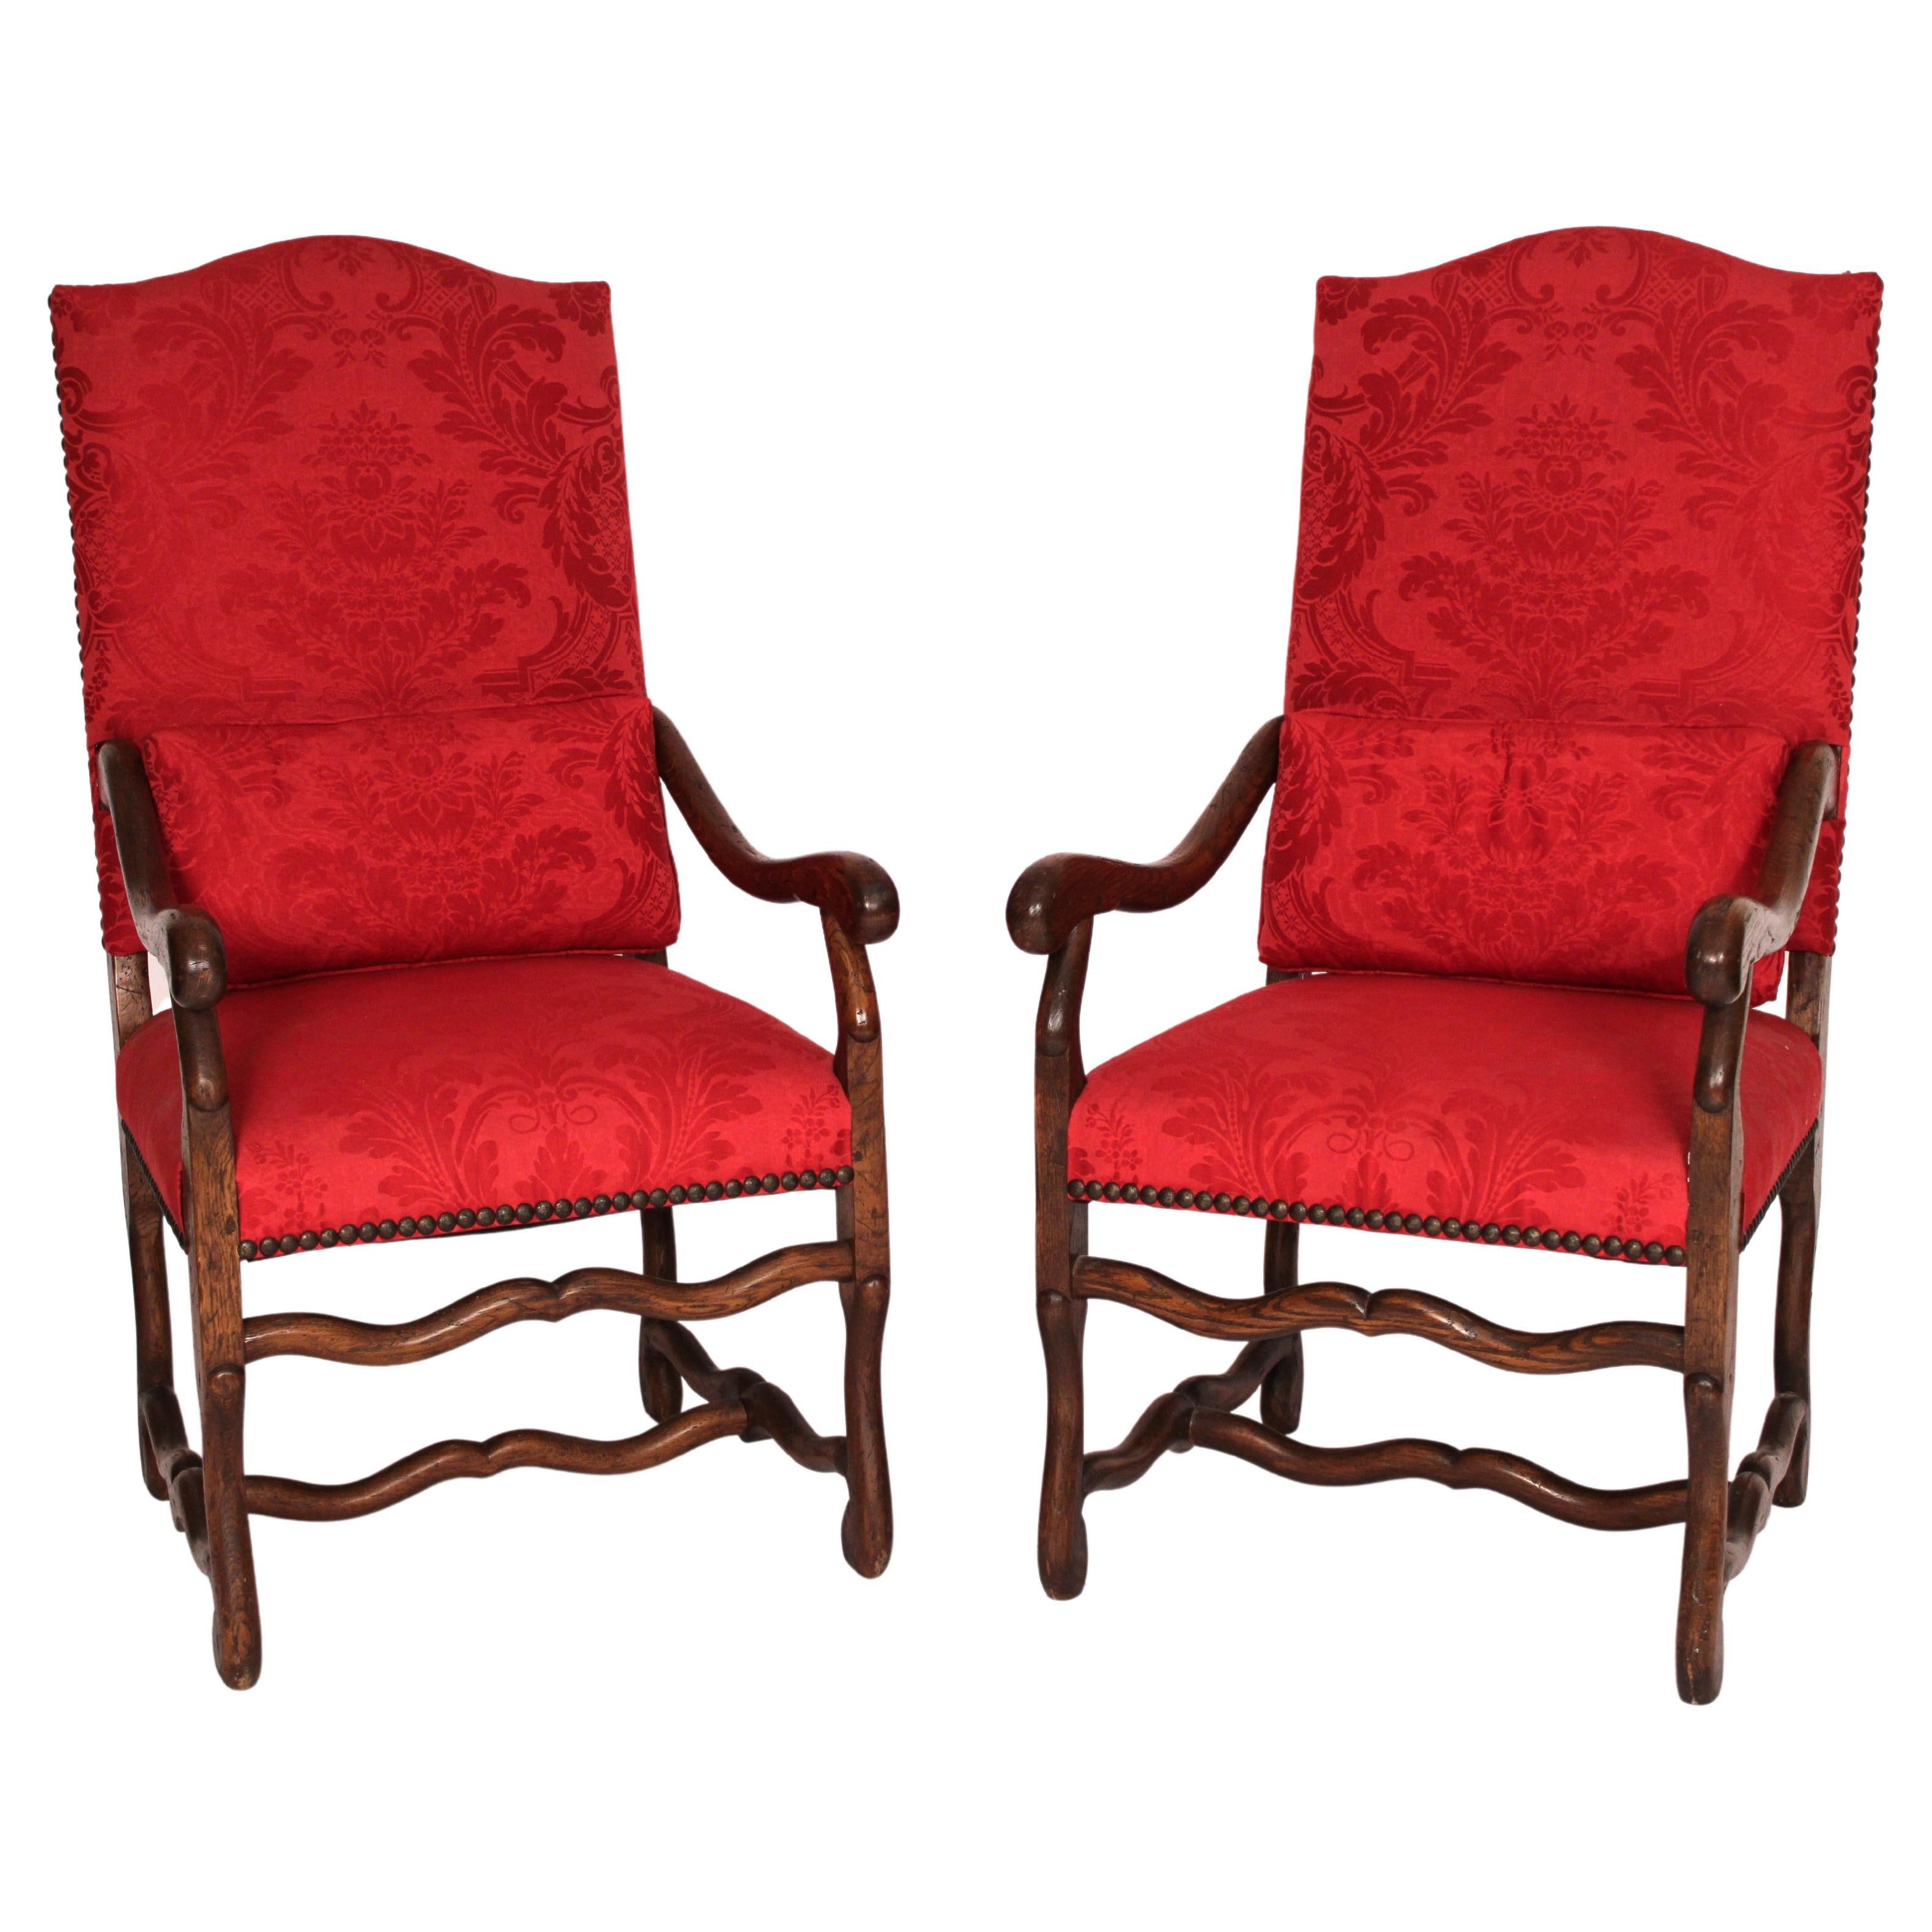 Pair of Louis XIV style Armchairs